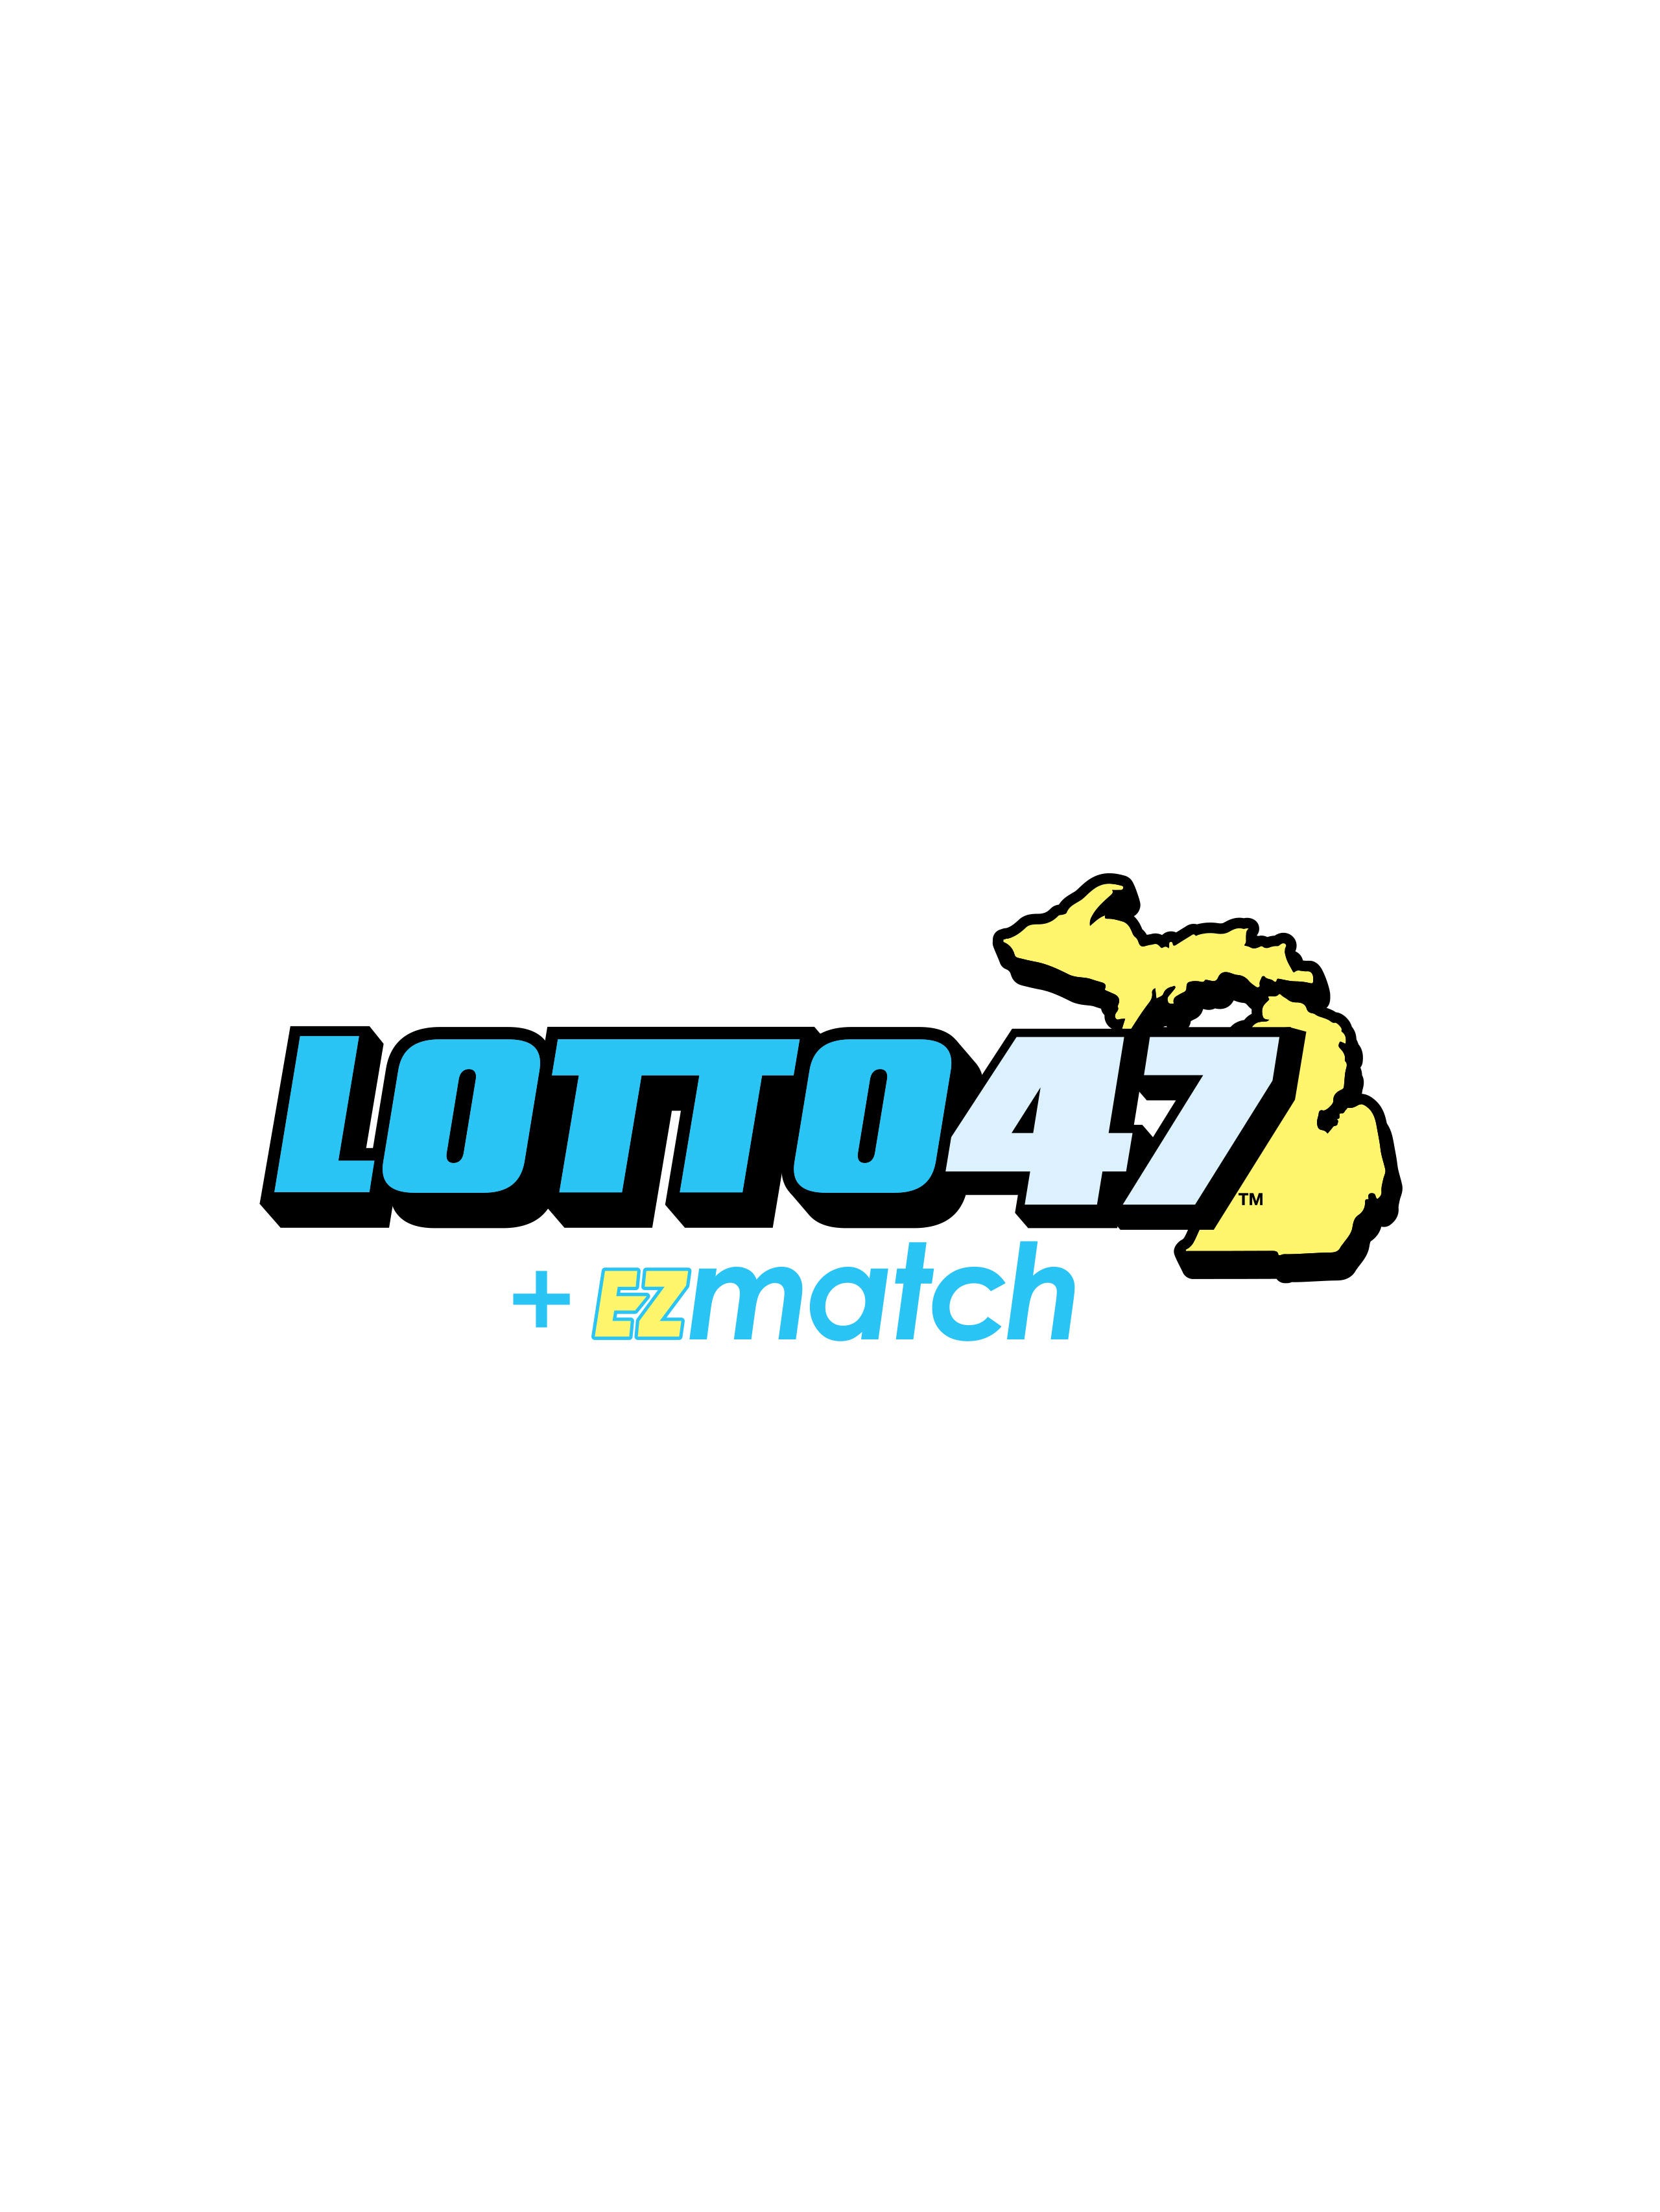 lotto 47 winning numbers for tonight